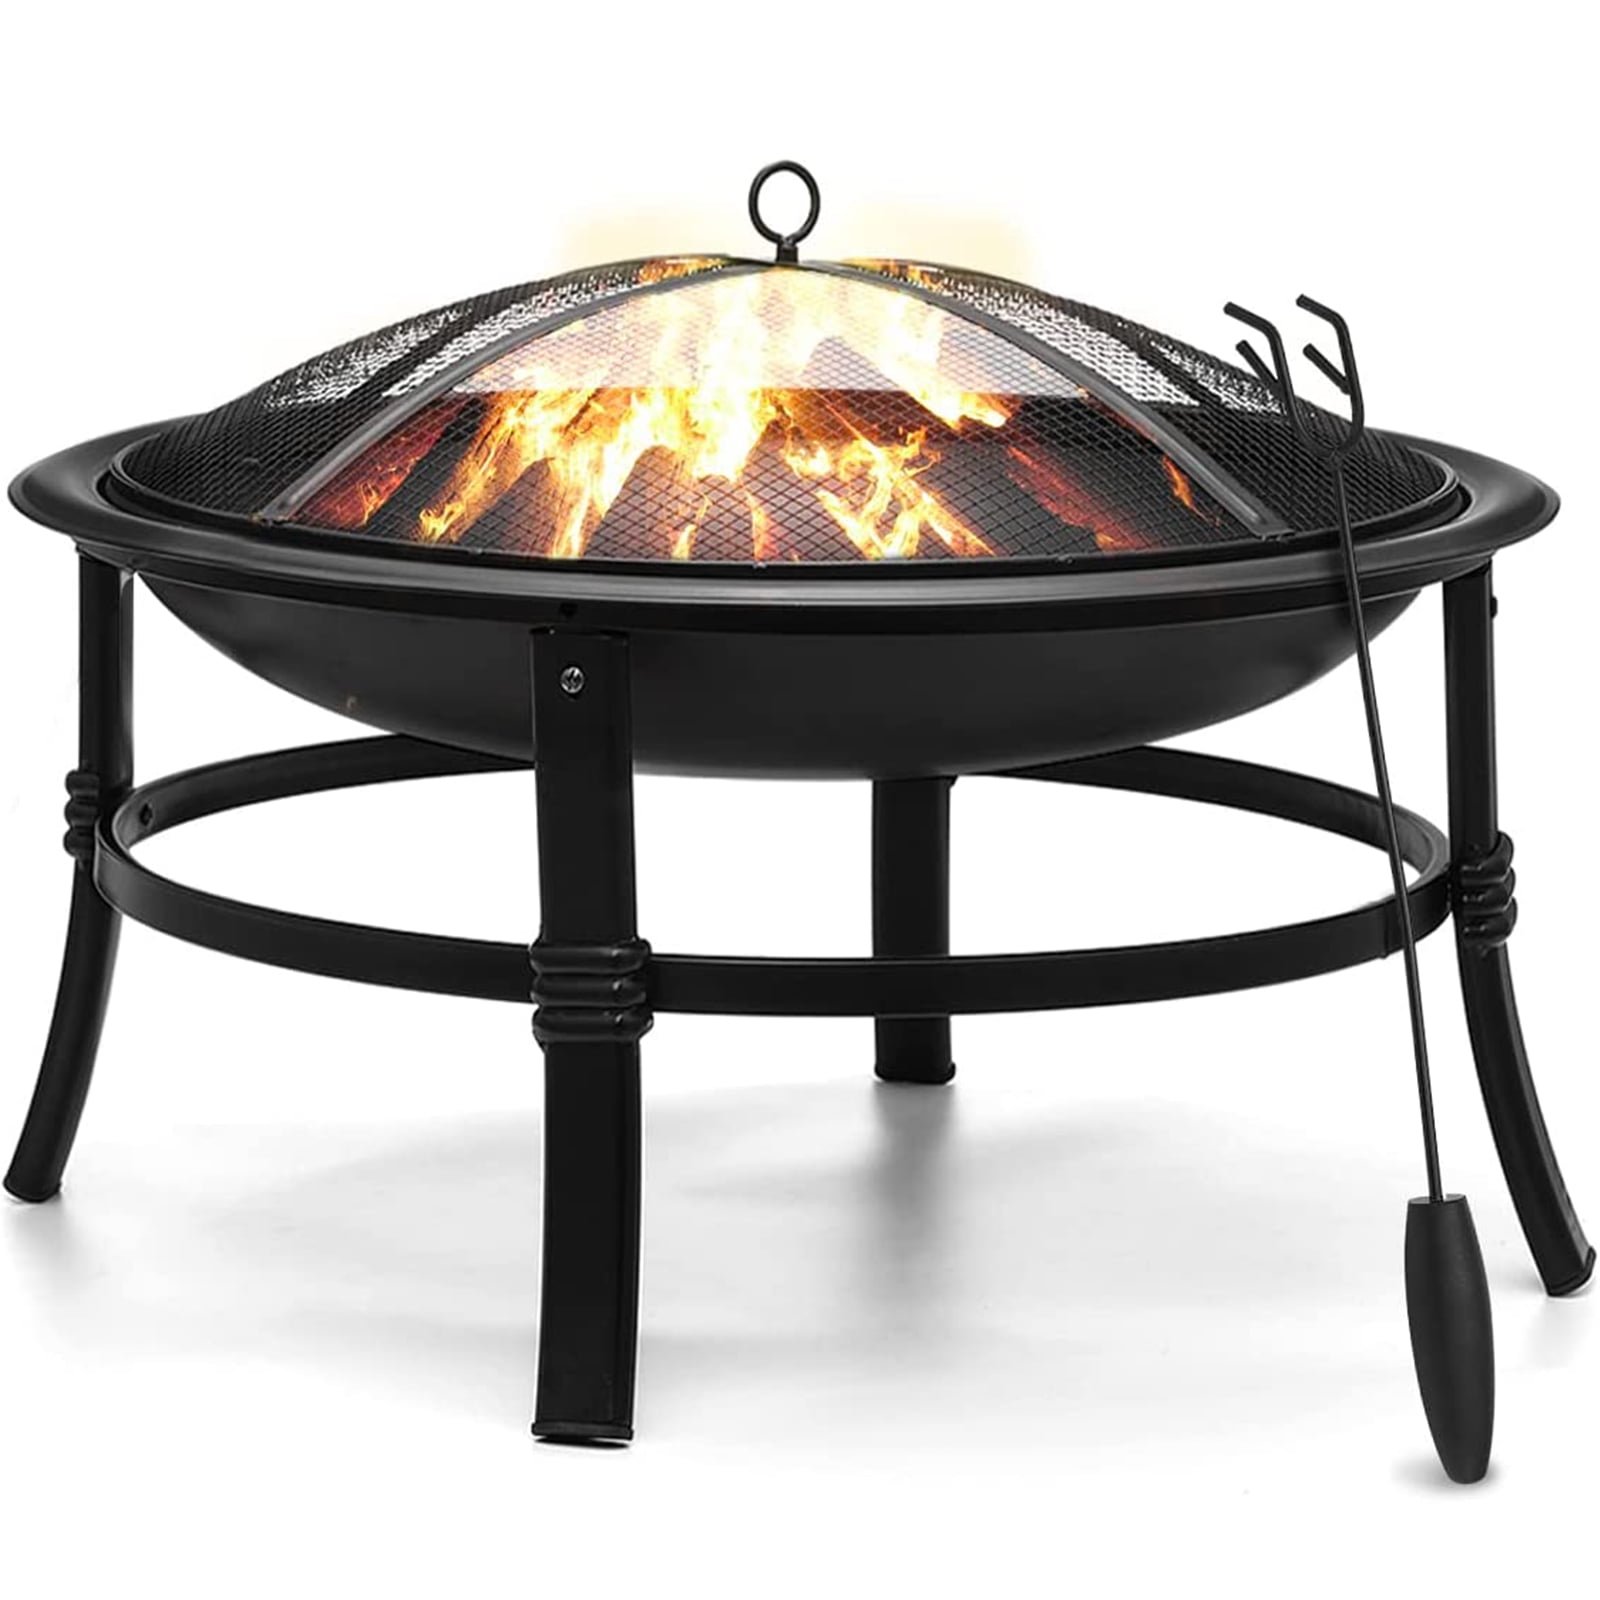 Outdoor 28" Mobile Portable Round Steel Wood Fire Pit with Convenient Wheels 